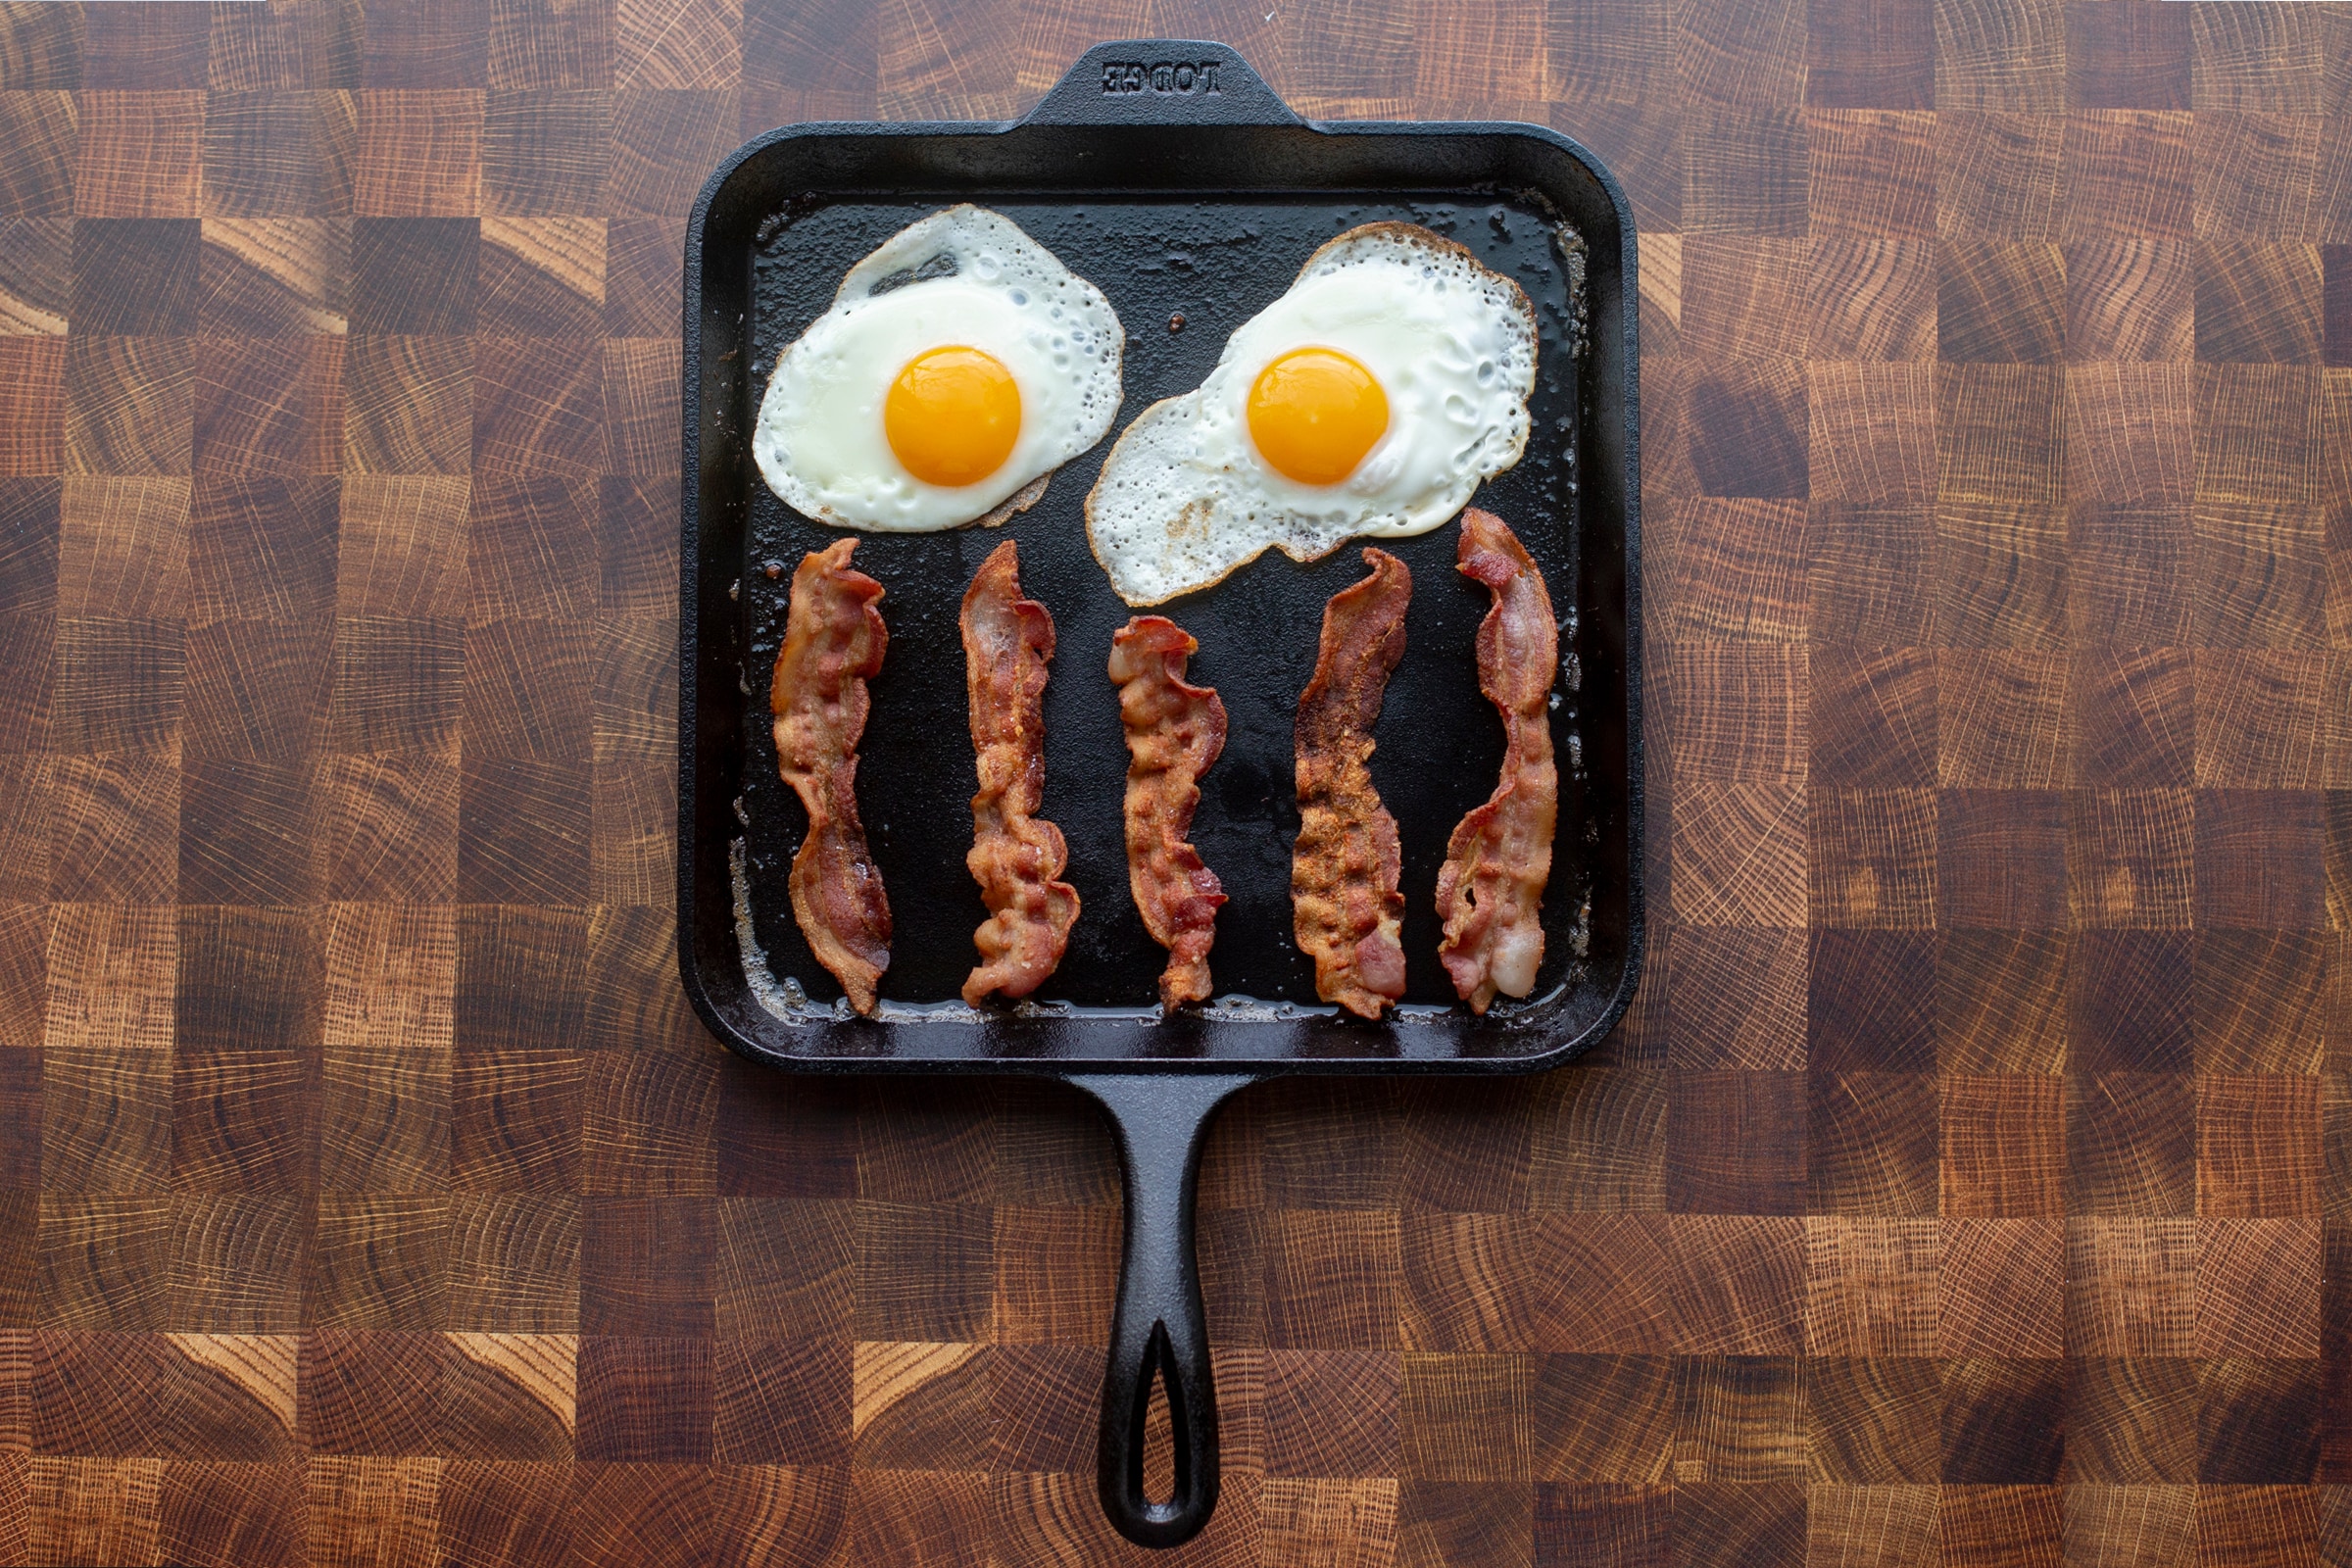 Lodge Cast Iron Griddle - Seasoned with Natural Oil - Versatile